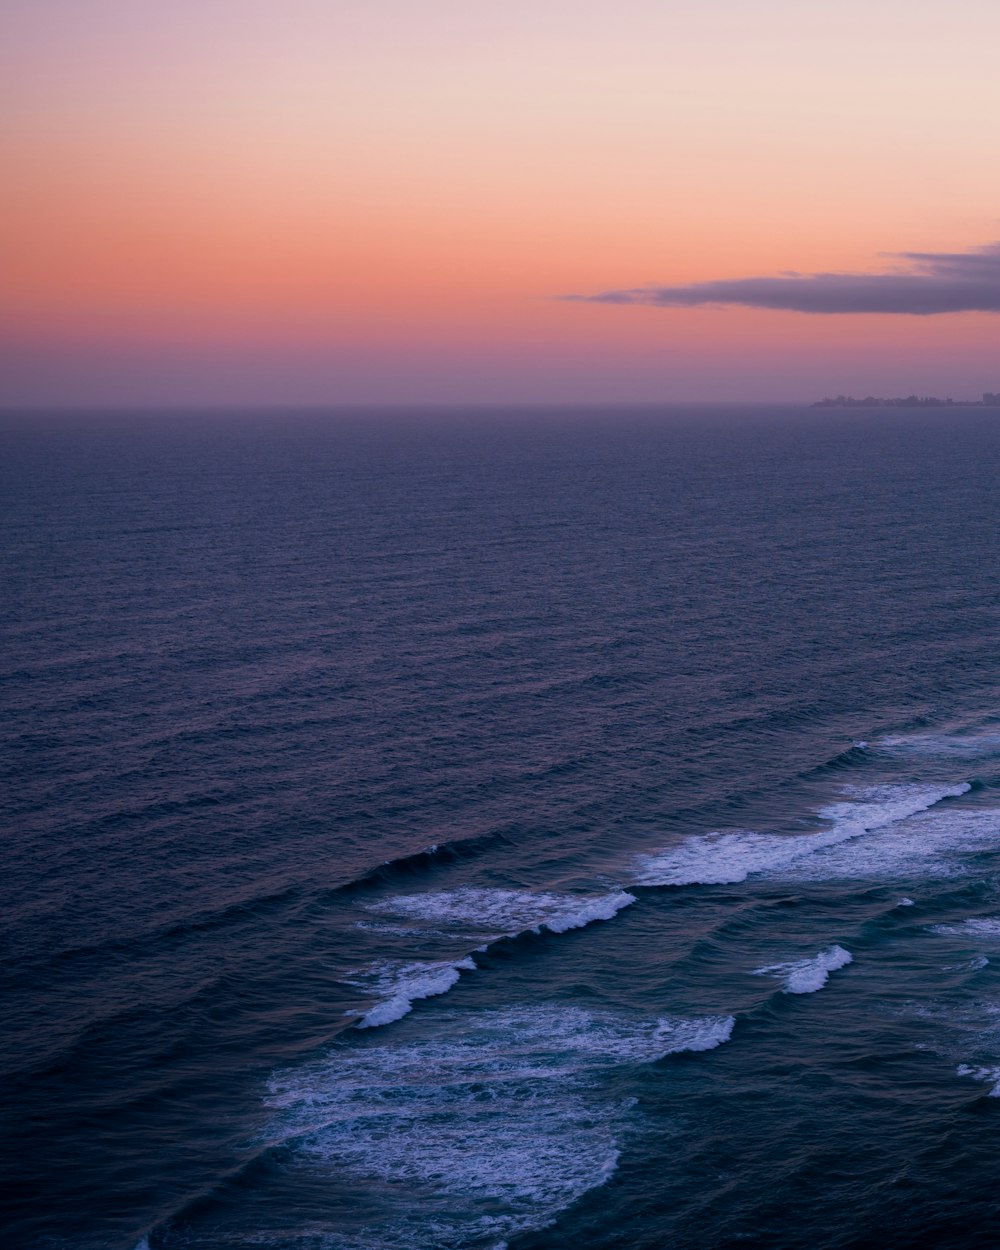 a view of the ocean at sunset from a high point of view